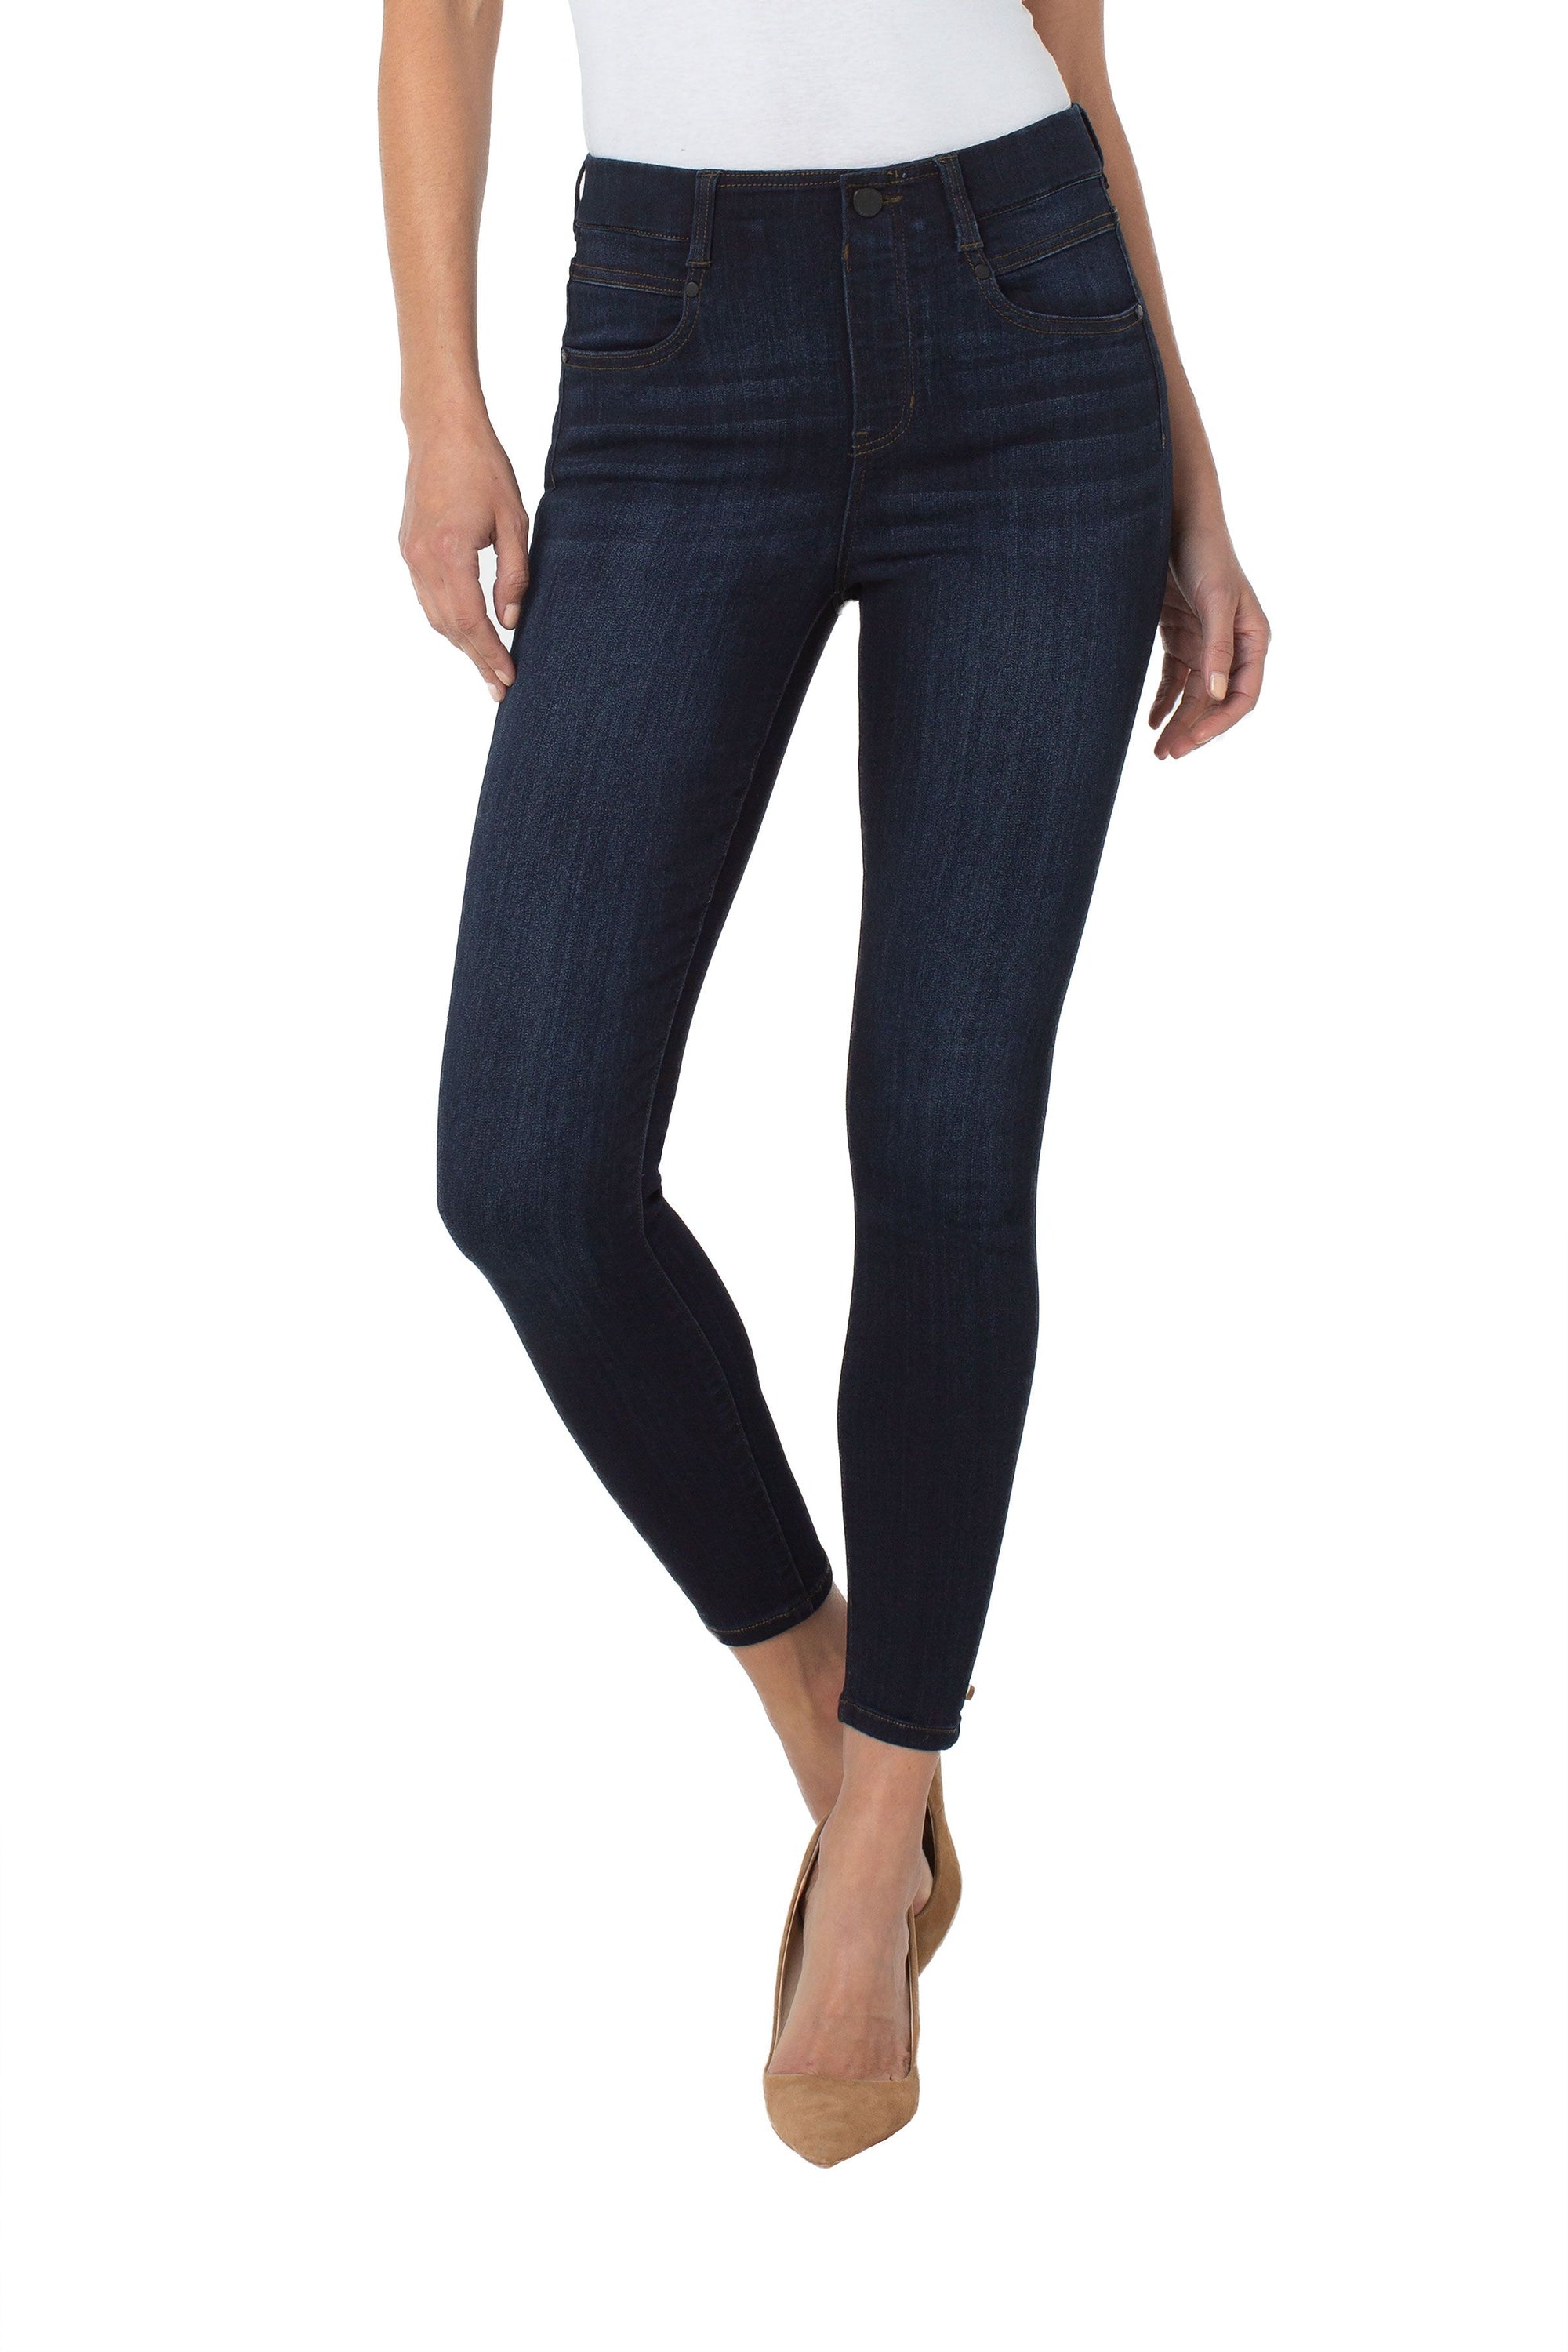 Liverpool Los Angeles Gia Glider Ankle Skinny Petite, Dunmore Dark - Statement Boutique